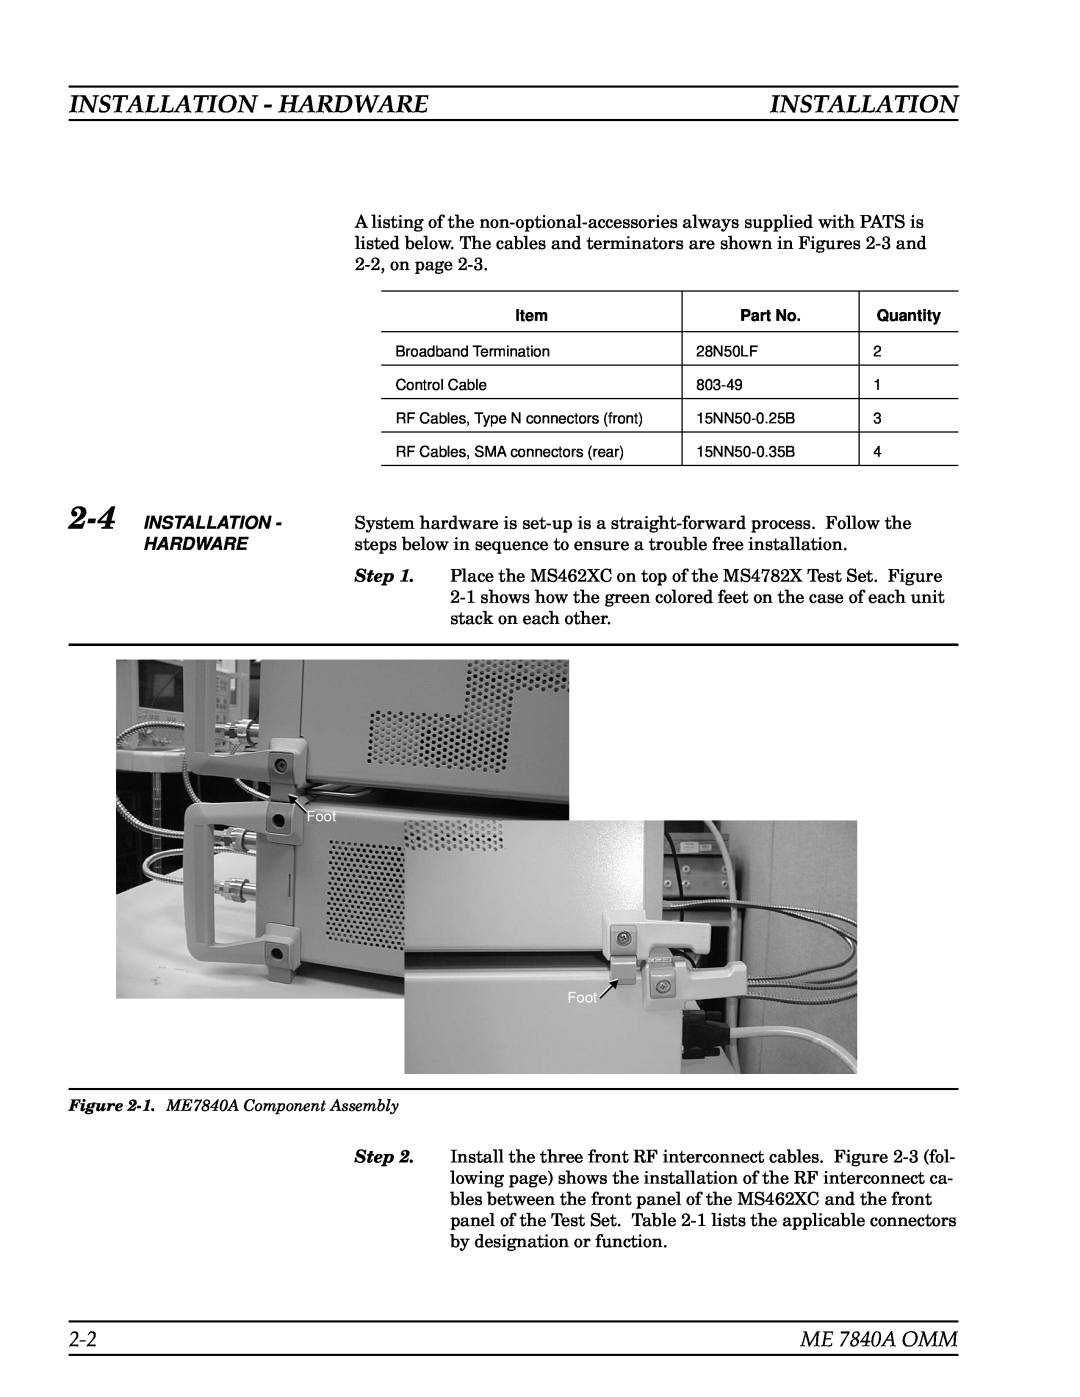 Anritsu ME7840A manual Installation - Hardware, ME 7840A OMM, Step 